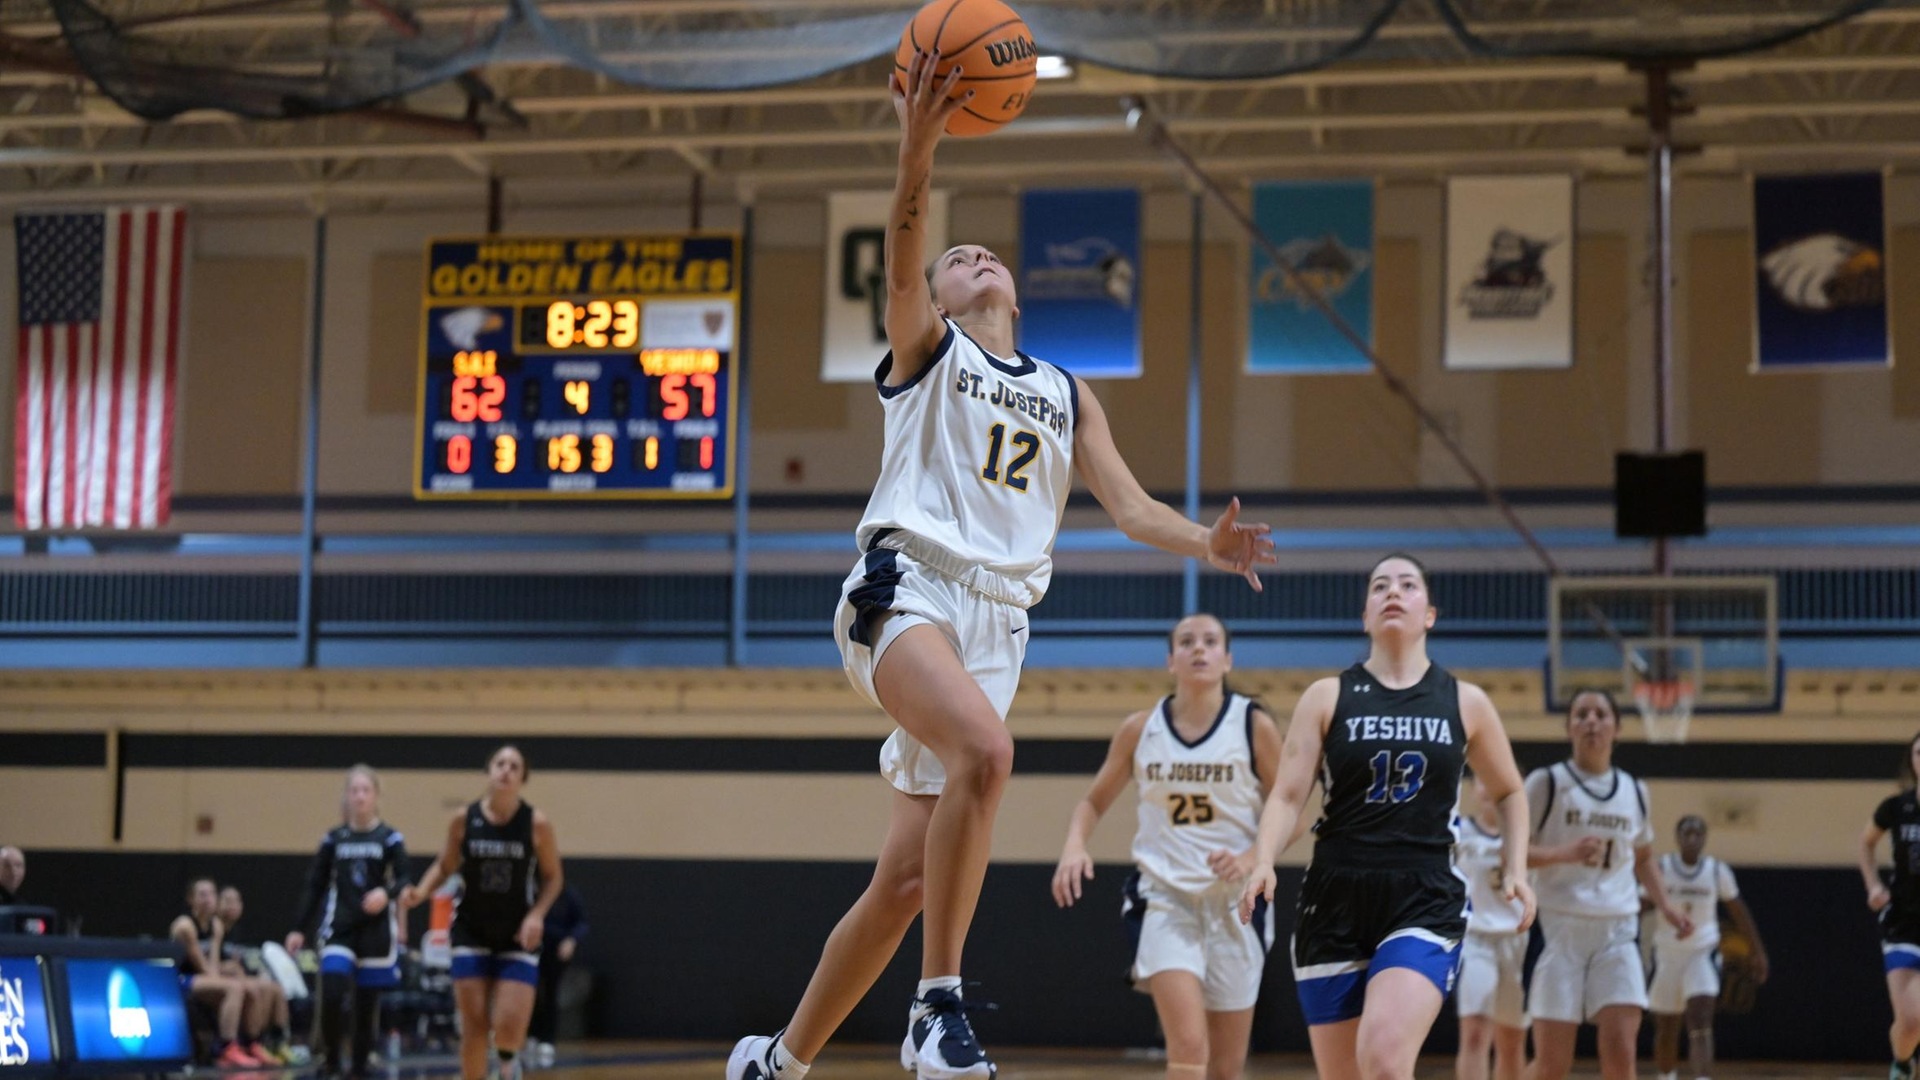 Women's Hoops Holds Off Sarah Lawrence for 89-74 Win